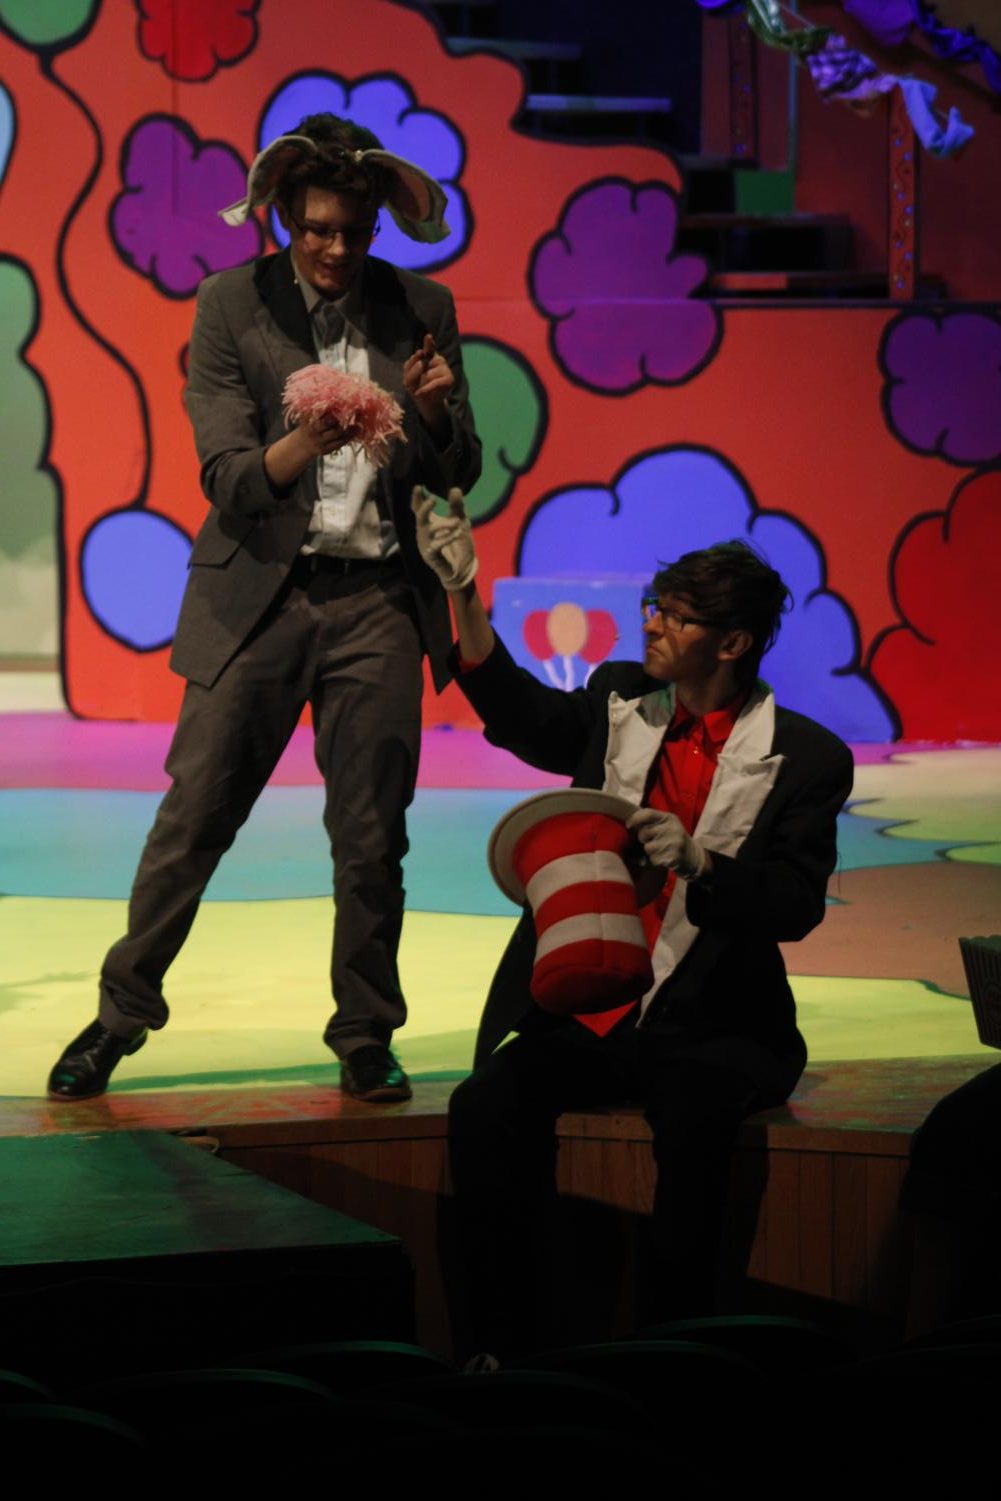 Seussical+%28Photos+by+Natalie+Wilson%29